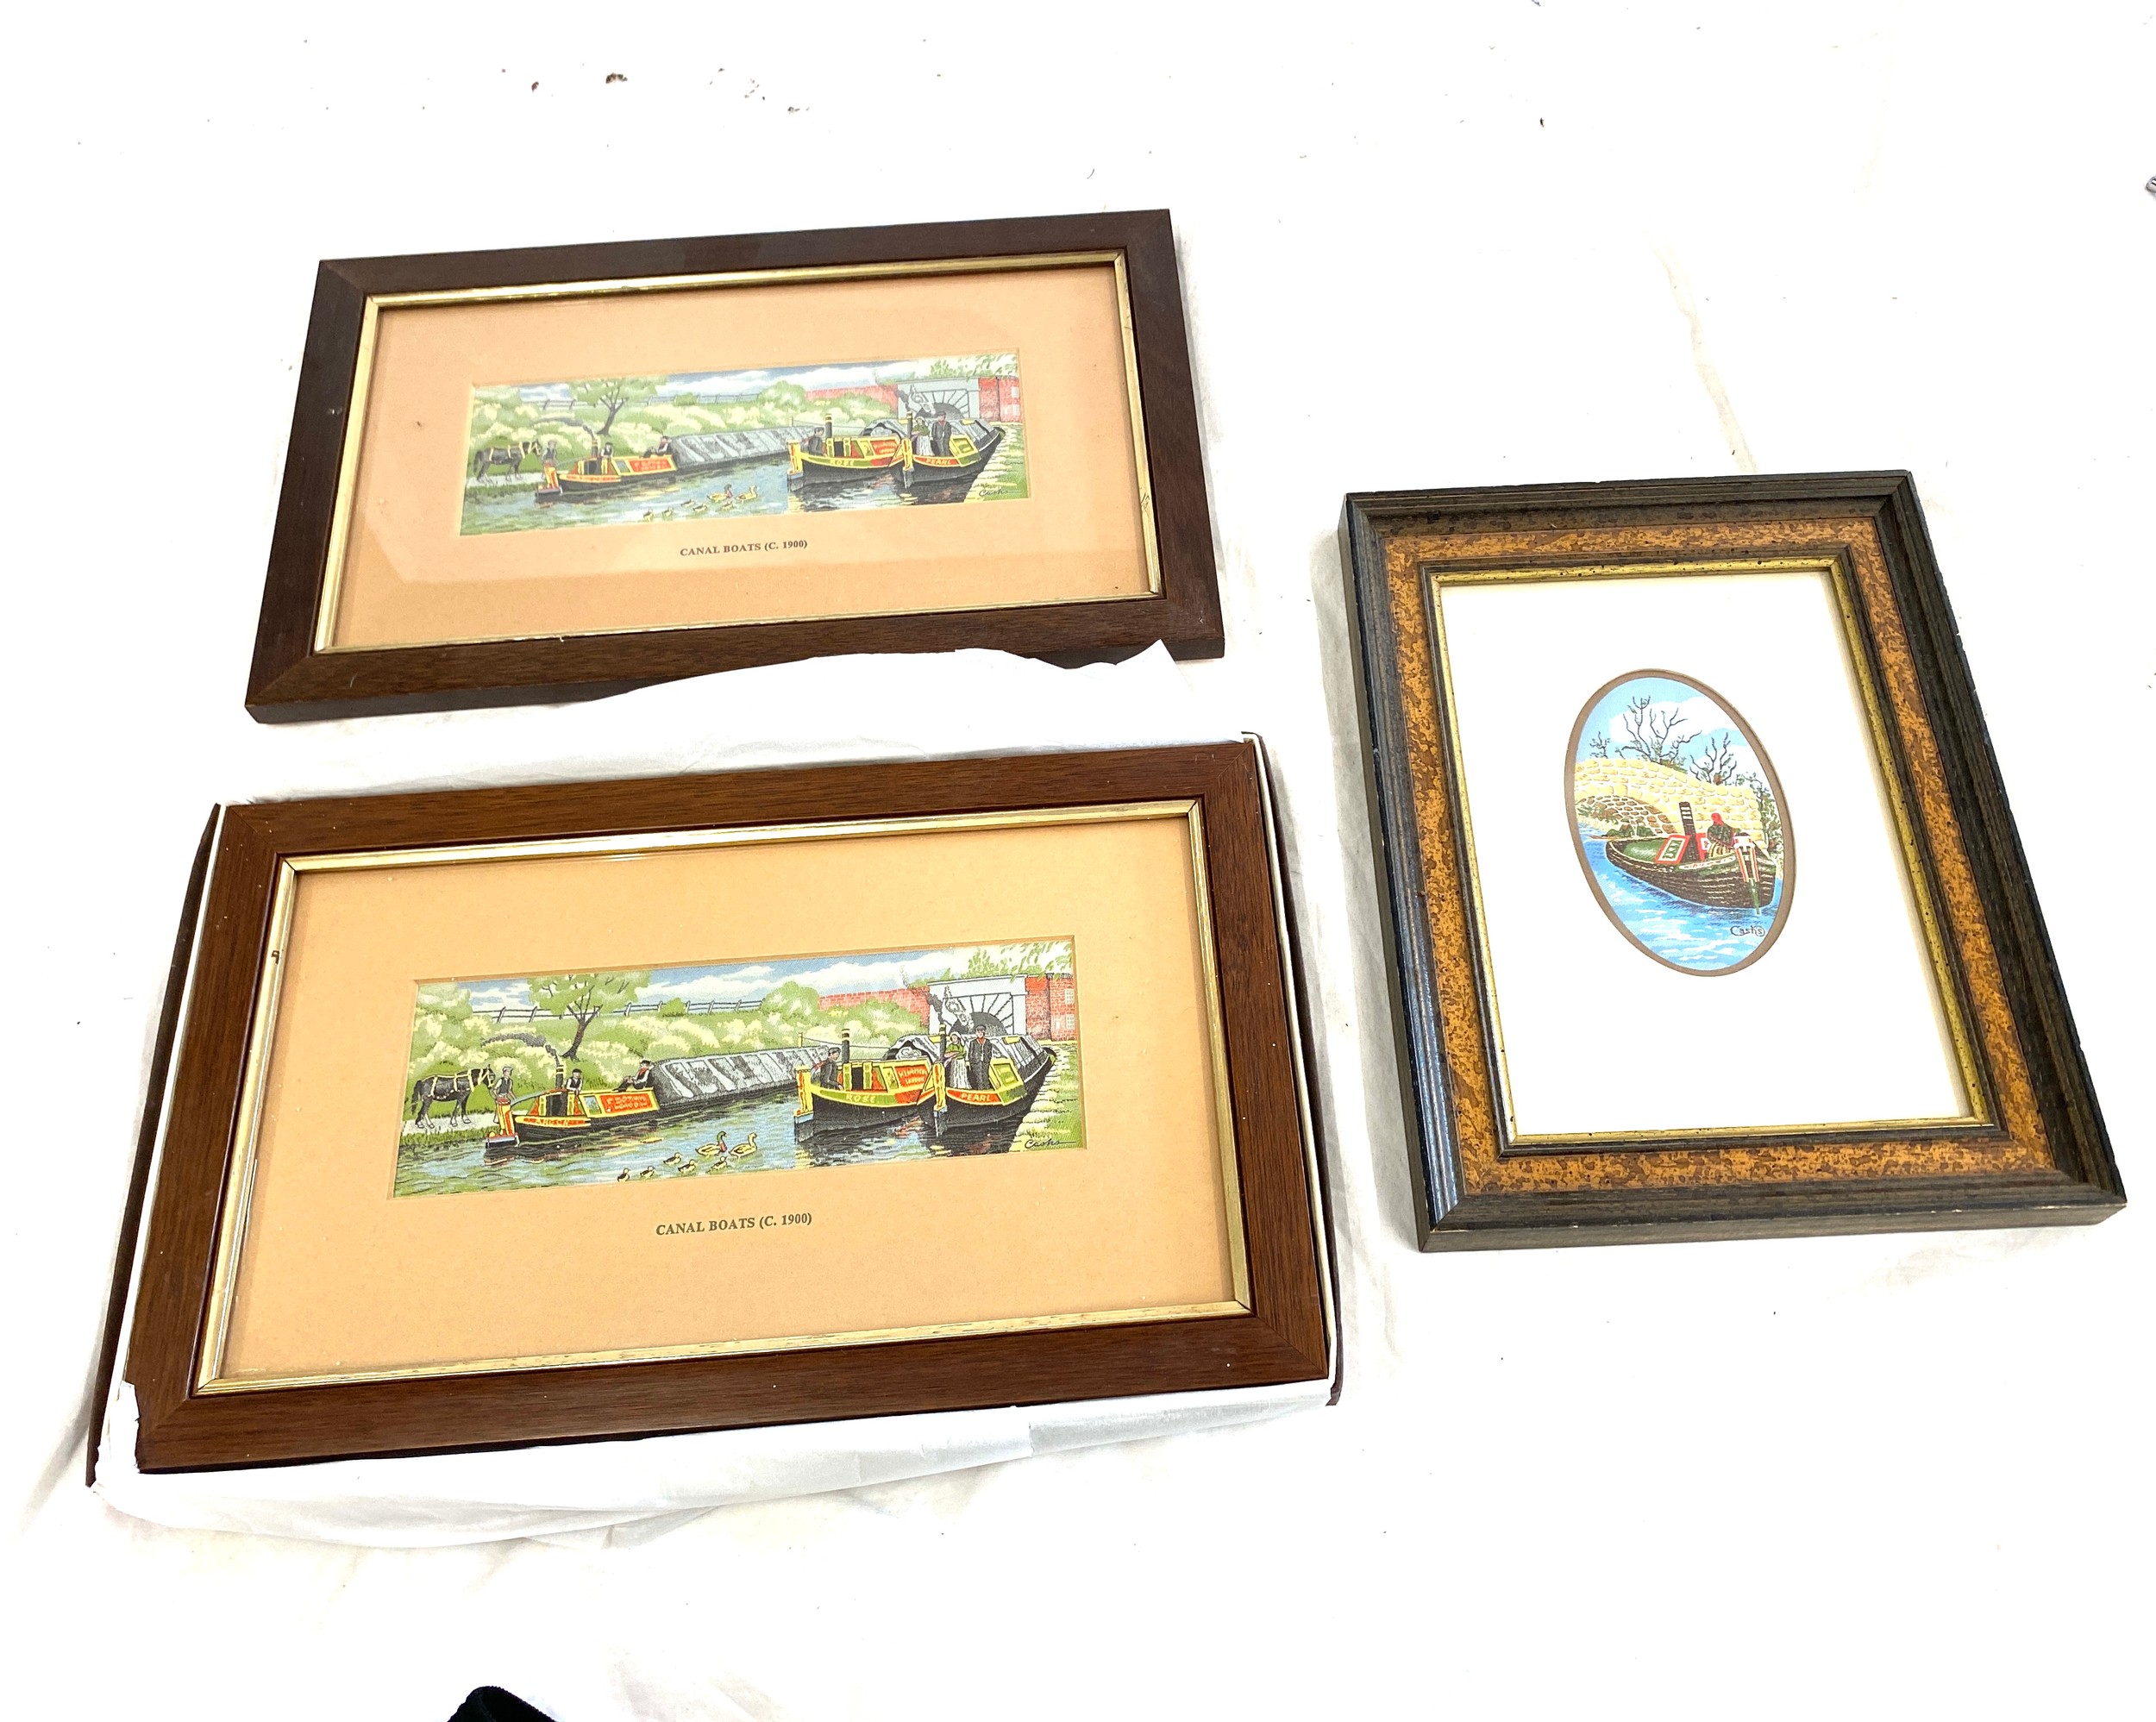 3 framed Woven pictures of boats measure approx 13" by 8.5"